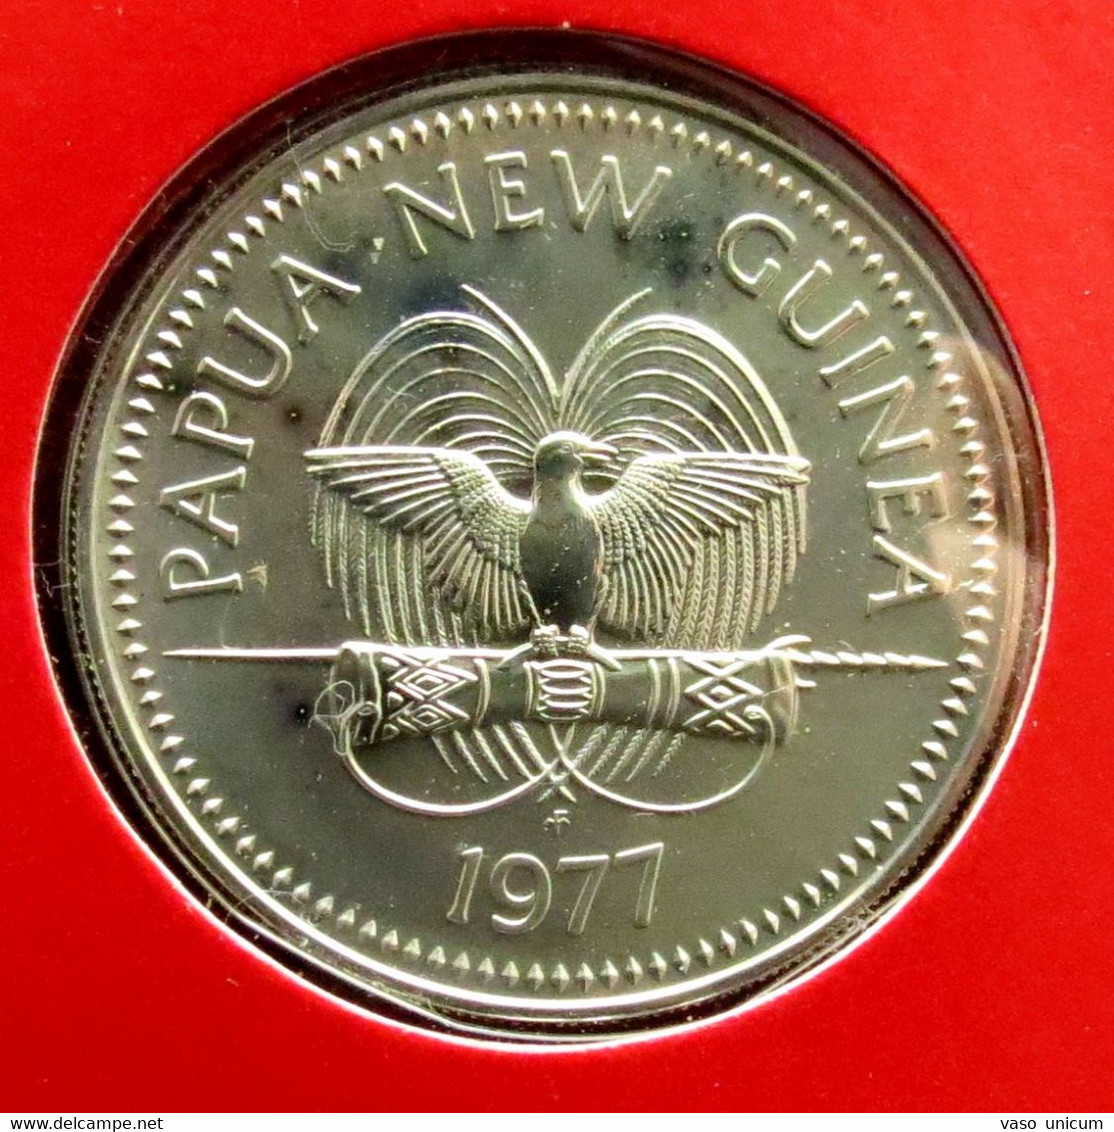 Papua New Guinea 20 Toea 1977 UNC - Minted 603 Coins Only - Papua New Guinea